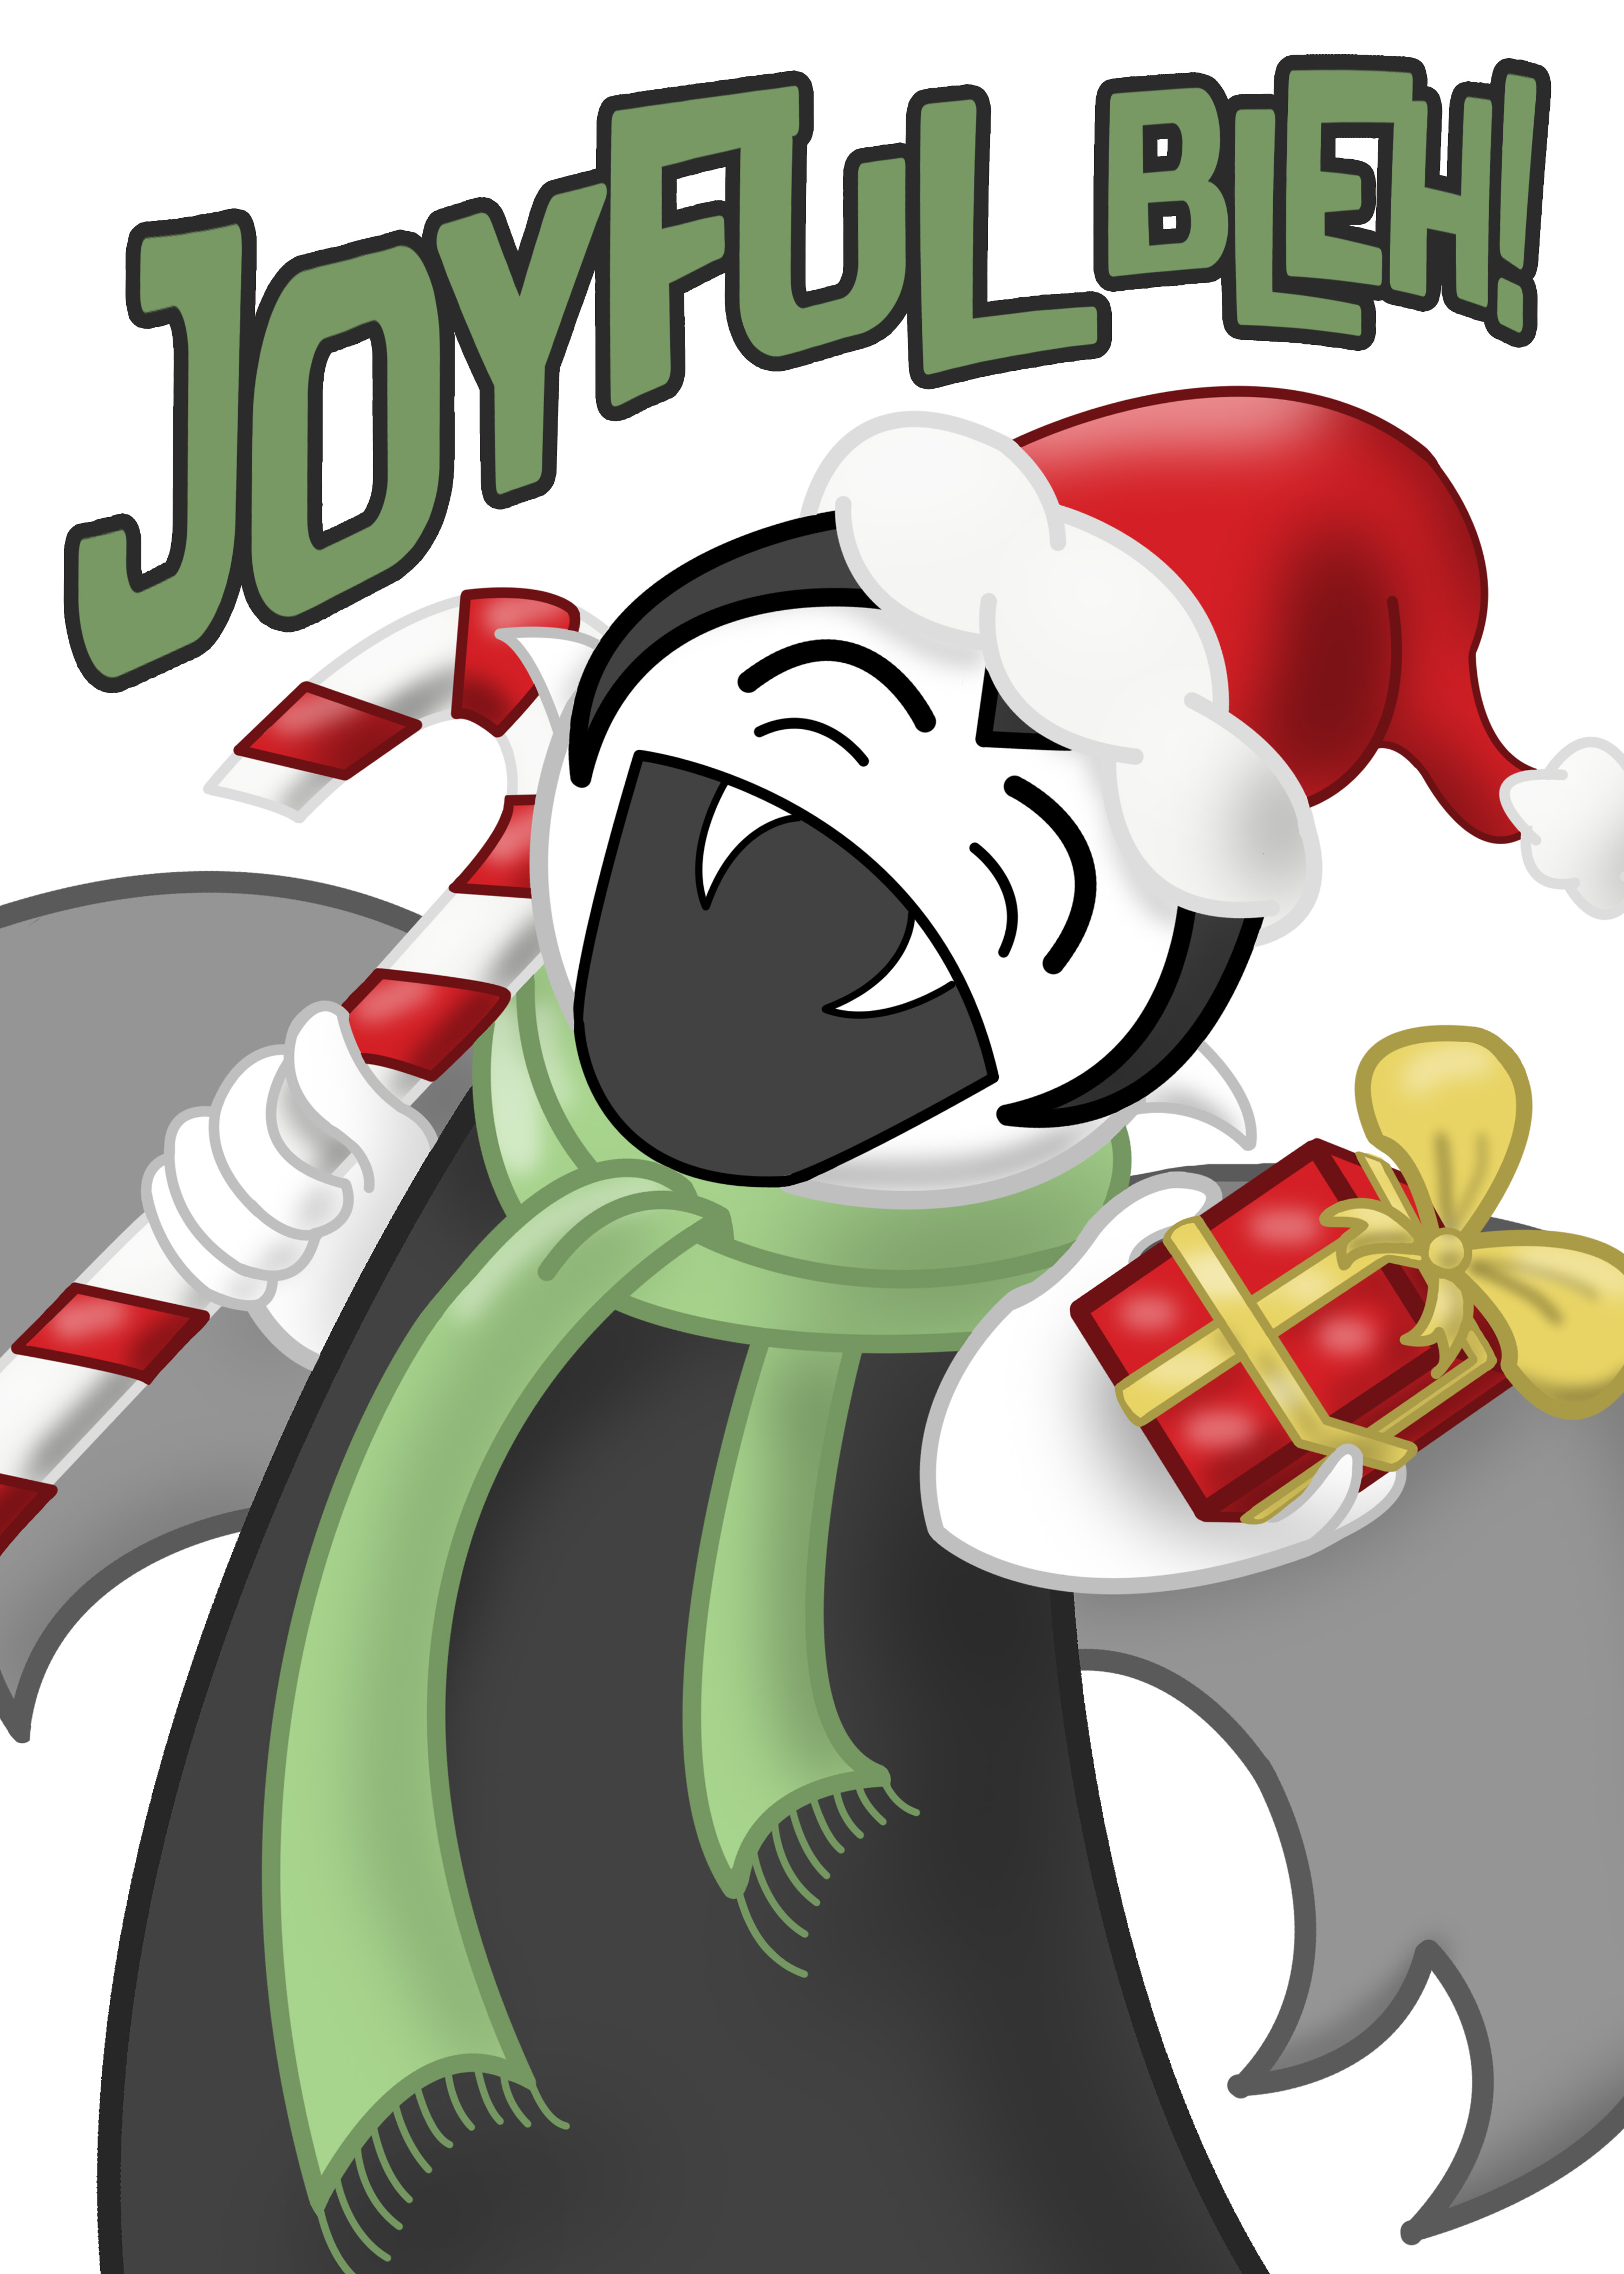 A Little Vampire exclaims “Joyful BLEH!” His is dressed in a red Santa hat and a green scarf, and holds a candy cane and a wrapped Christmas present.